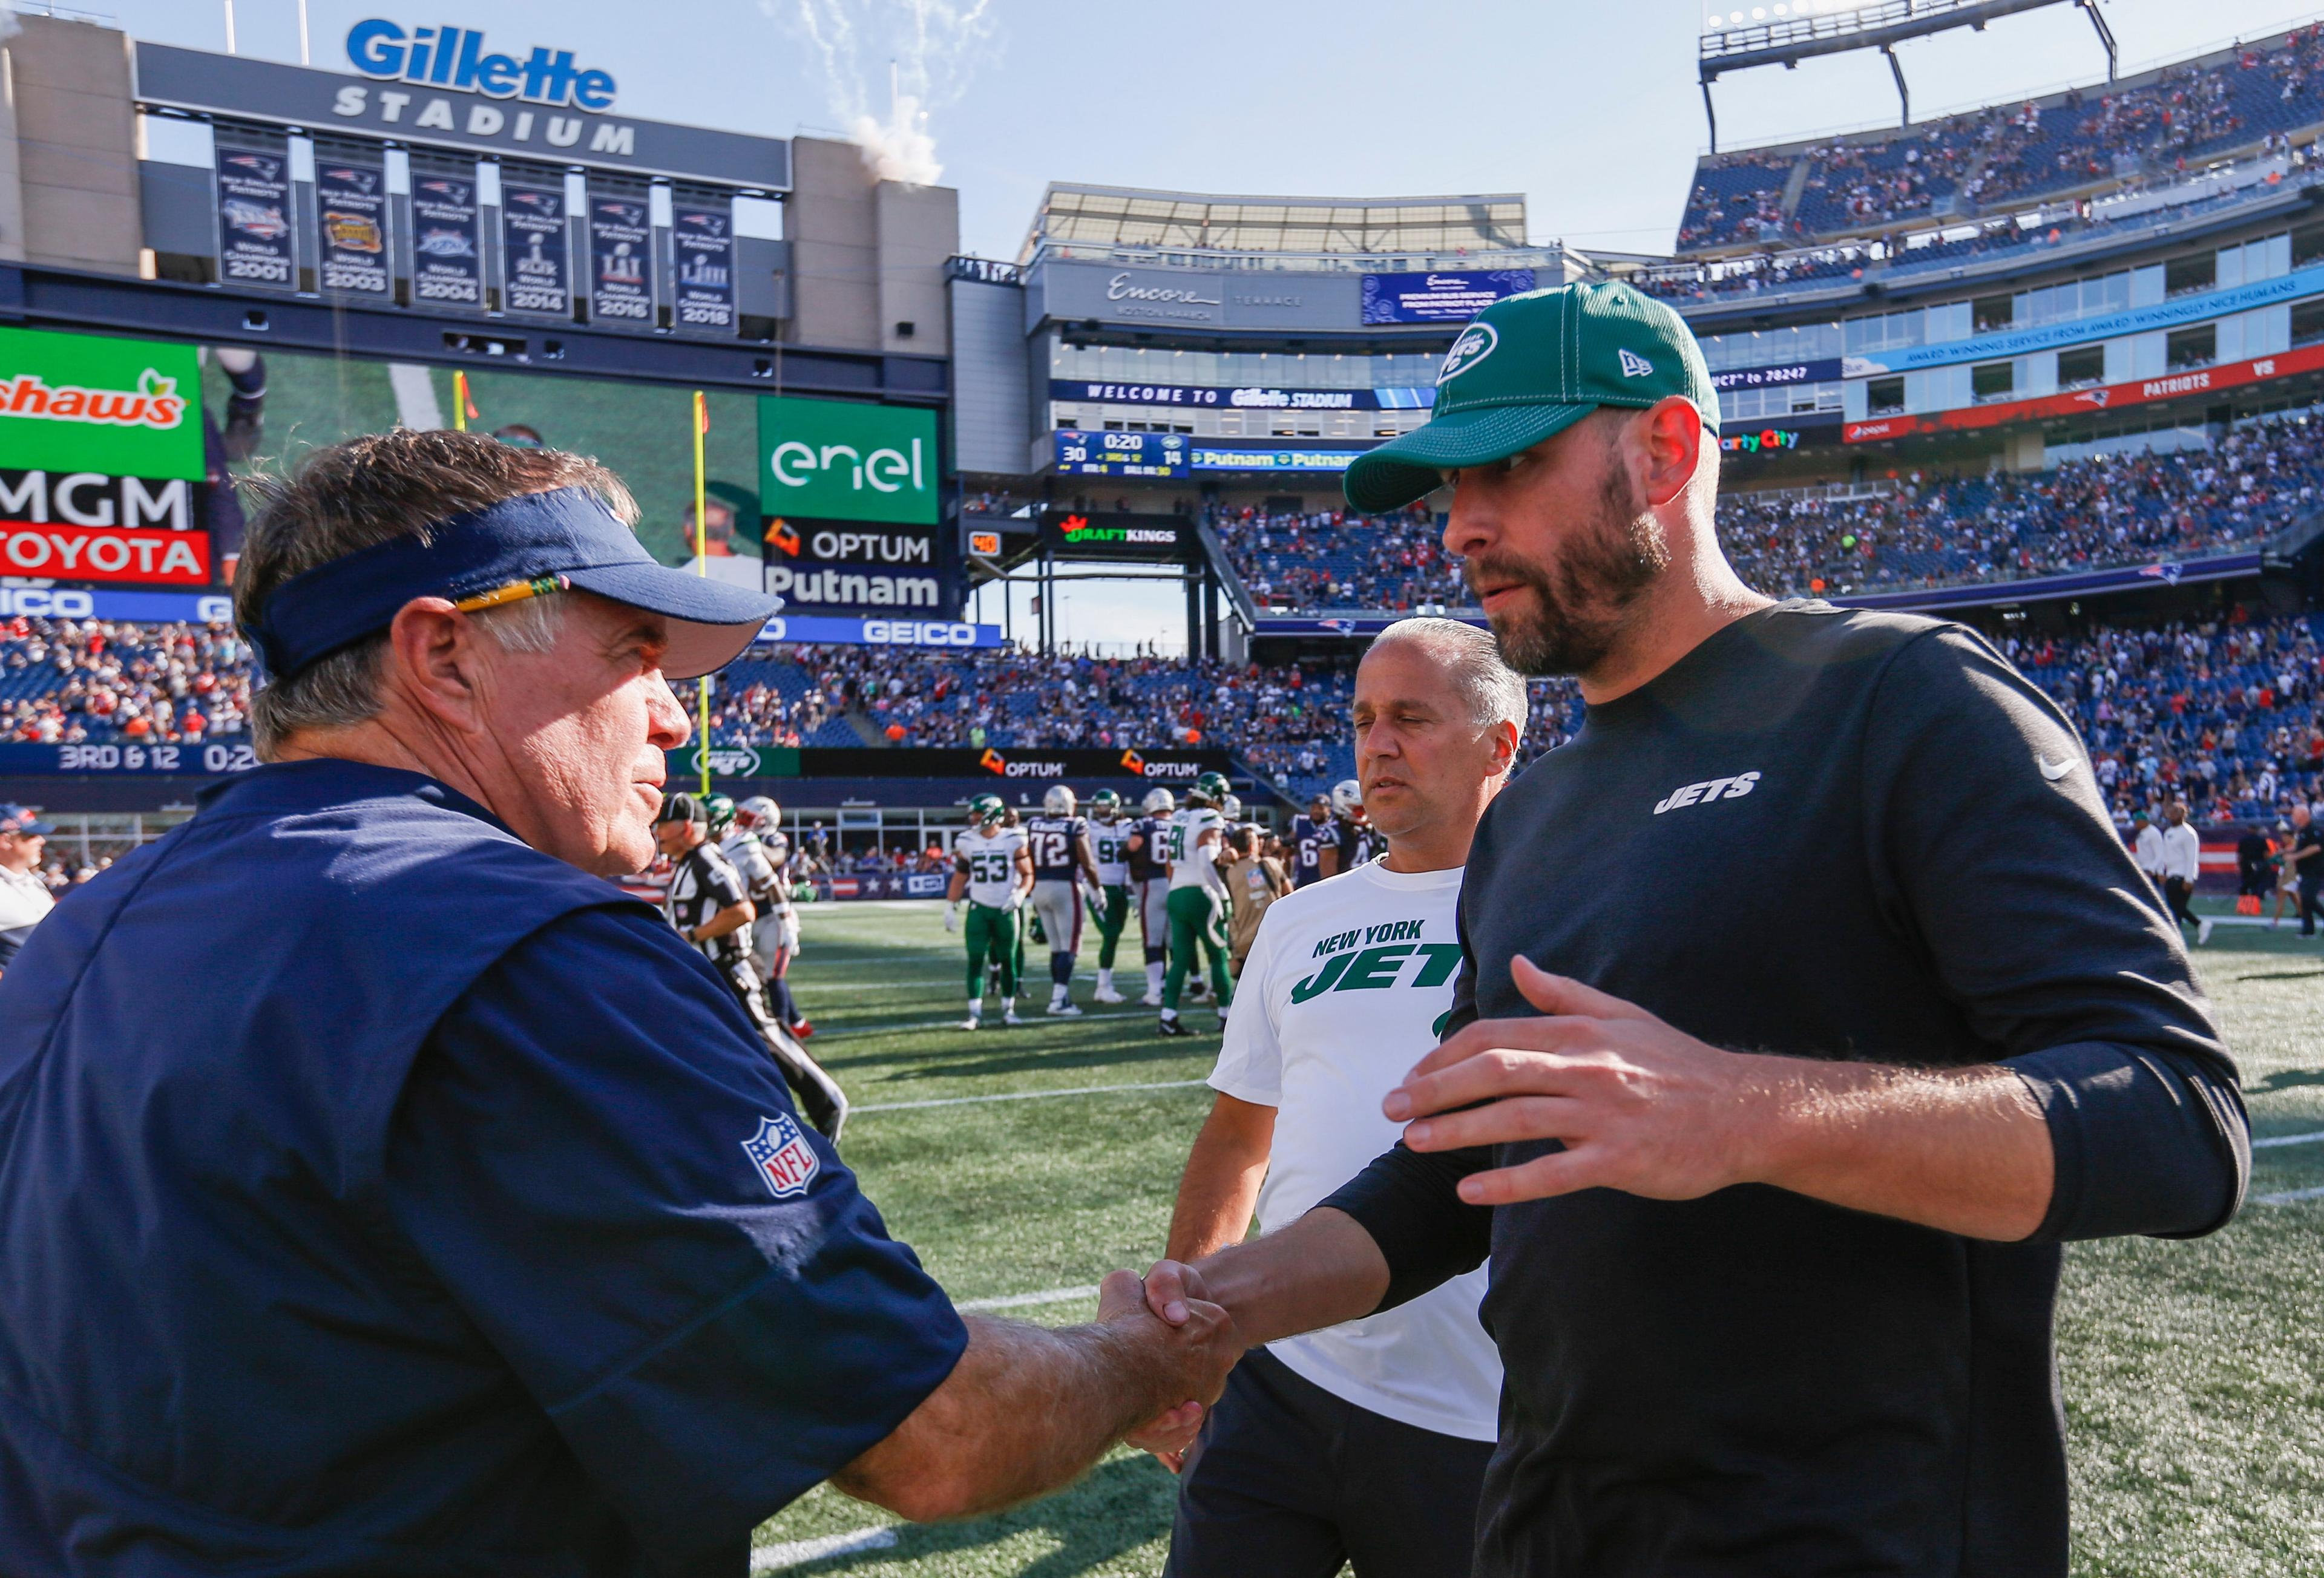 Sep 22, 2019; Foxborough, MA, USA; New England Patriots head coach Bill Belichick greets New York Jets head coach Adam Gase after the game at Gillette Stadium. / Greg M. Cooper-USA TODAY Sports